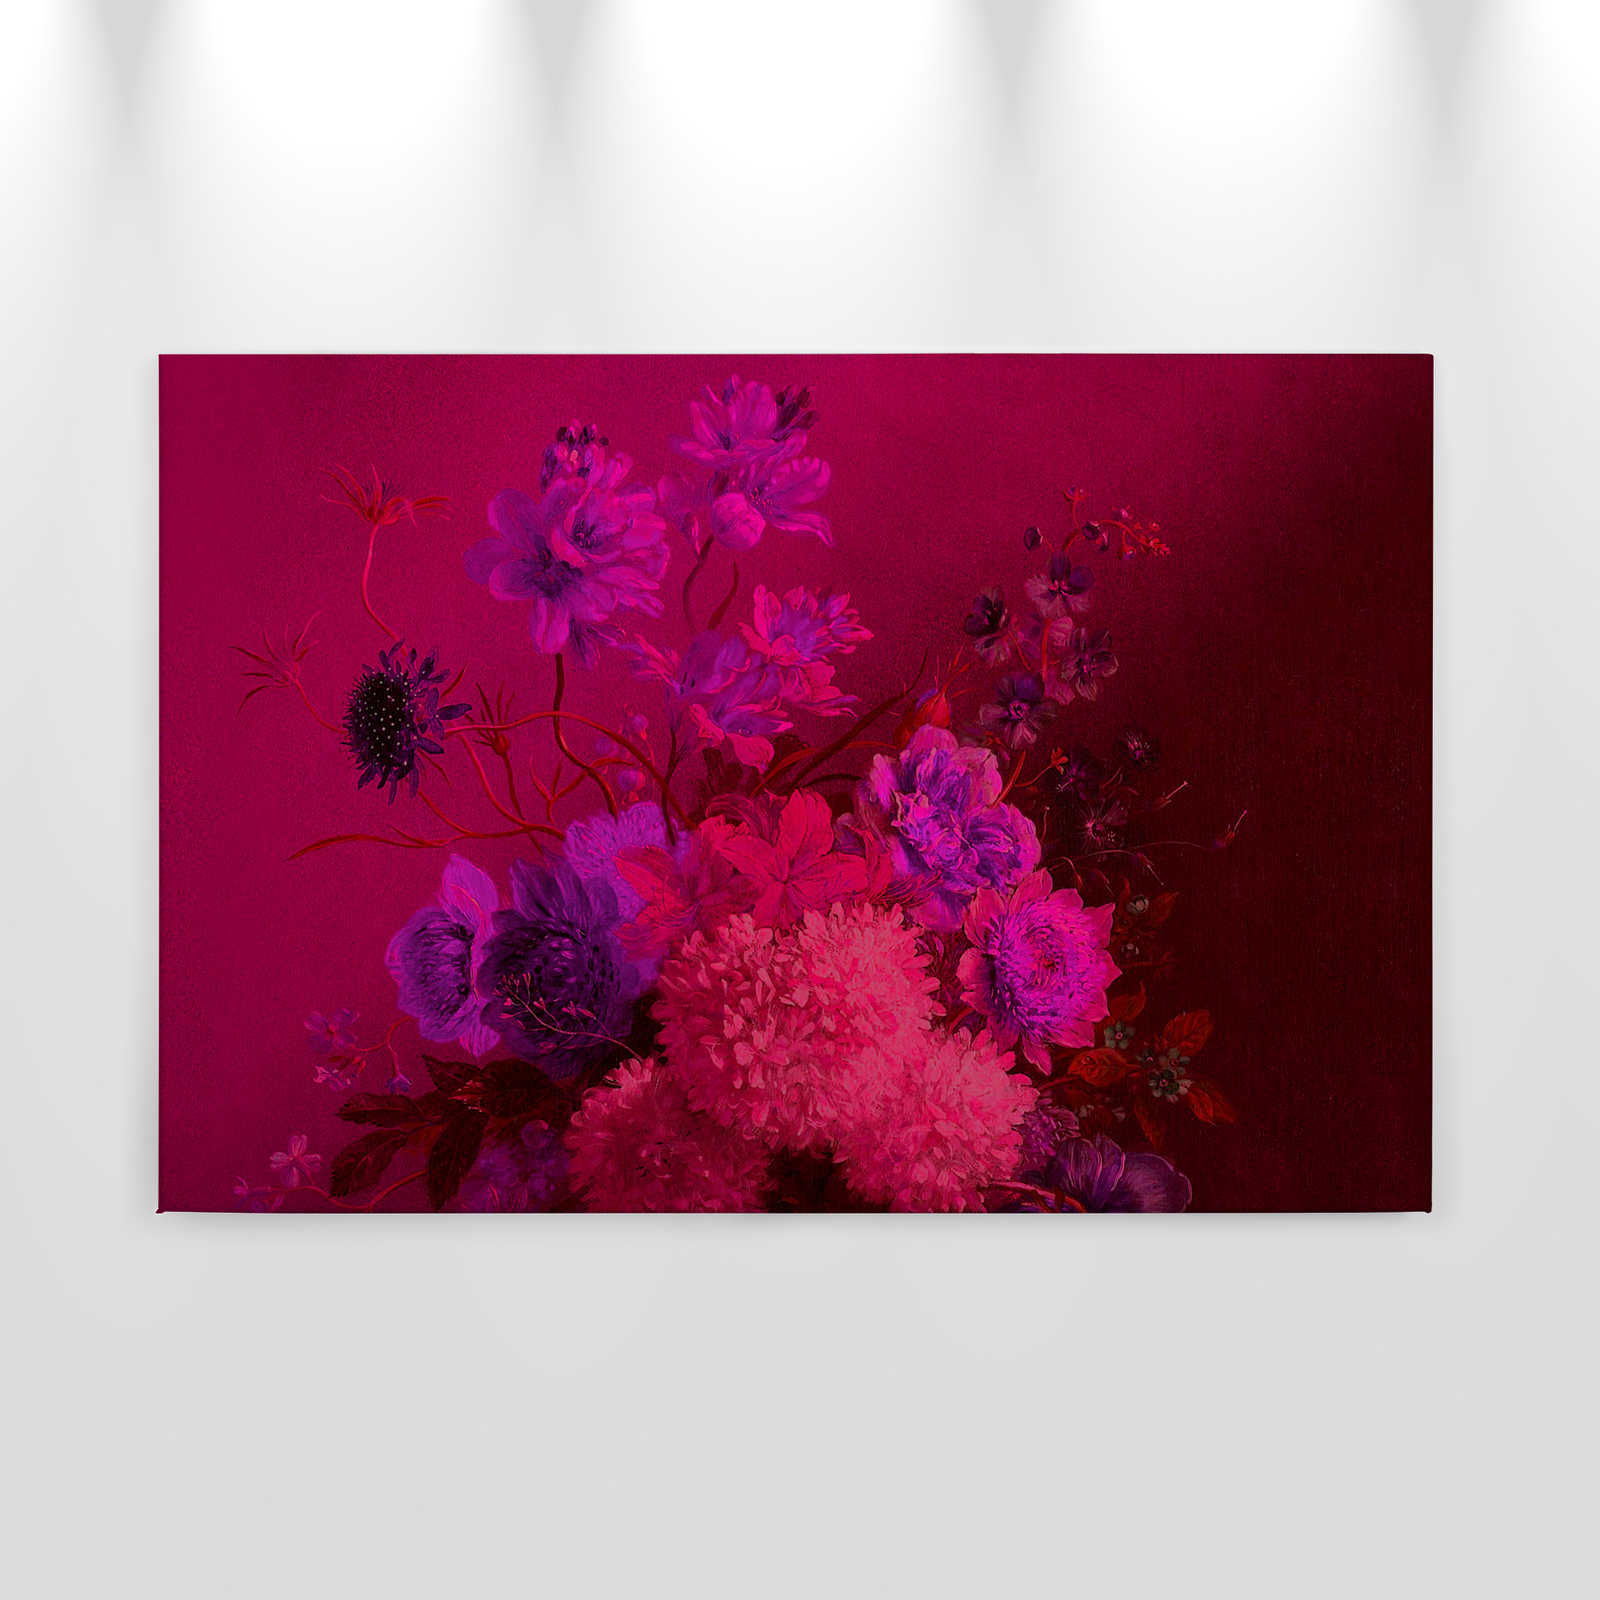             Neon Canvas Painting with Flowers Still Life | bouquet Vibran 2 - 0.90 m x 0.60 m
        